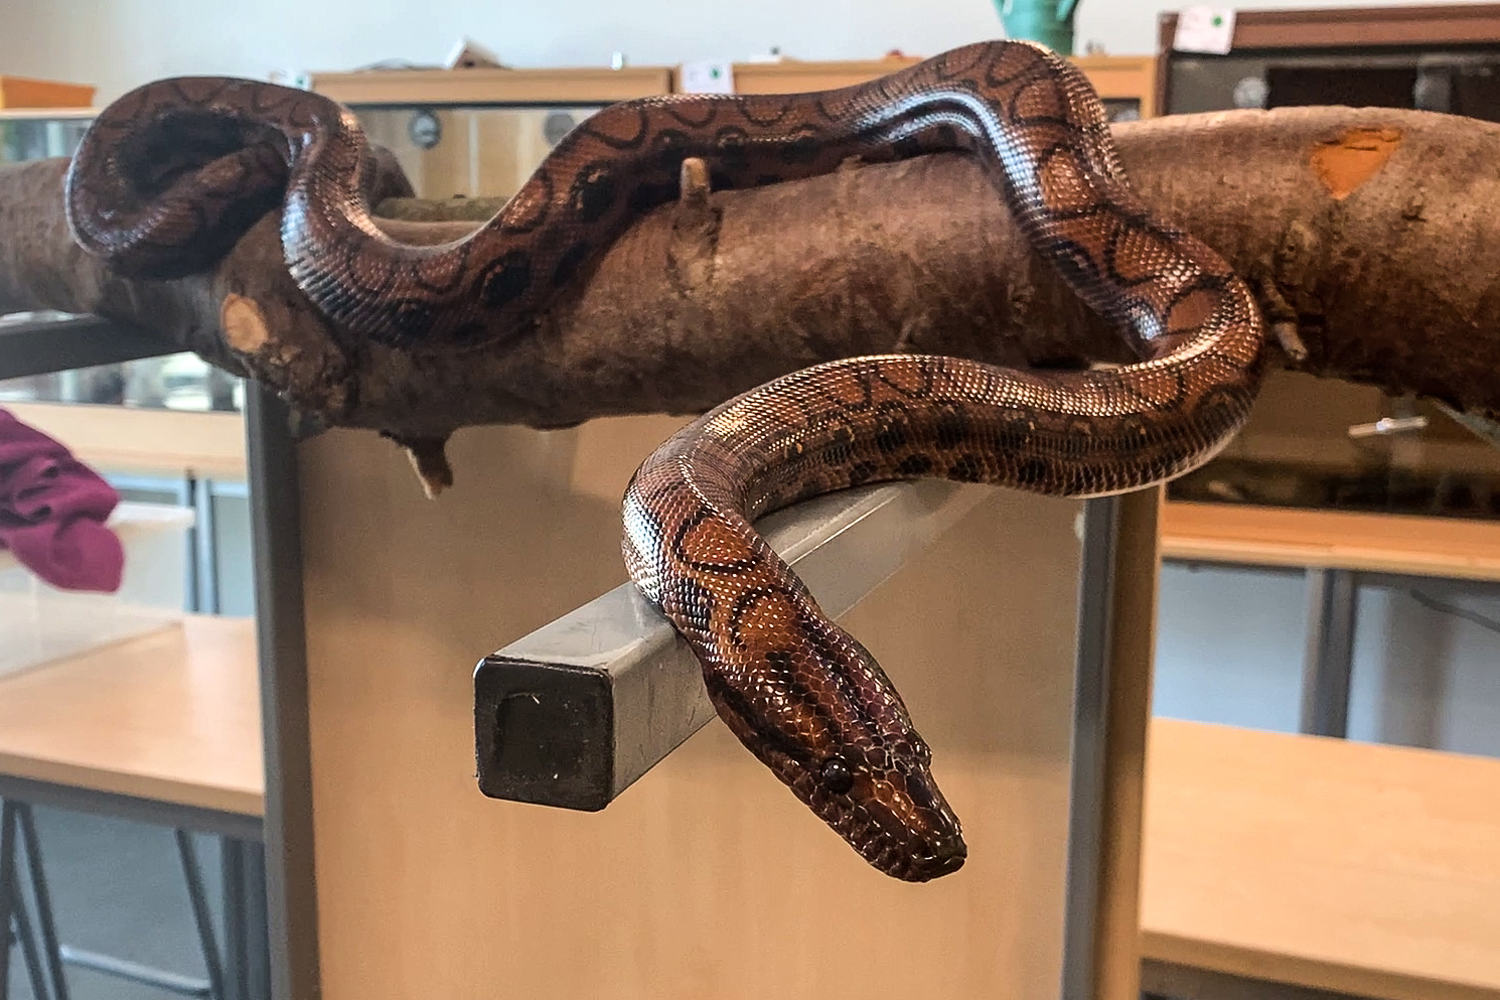 Meet Ronaldo, the boa constrictor who mysteriously gave birth to 14 snakes